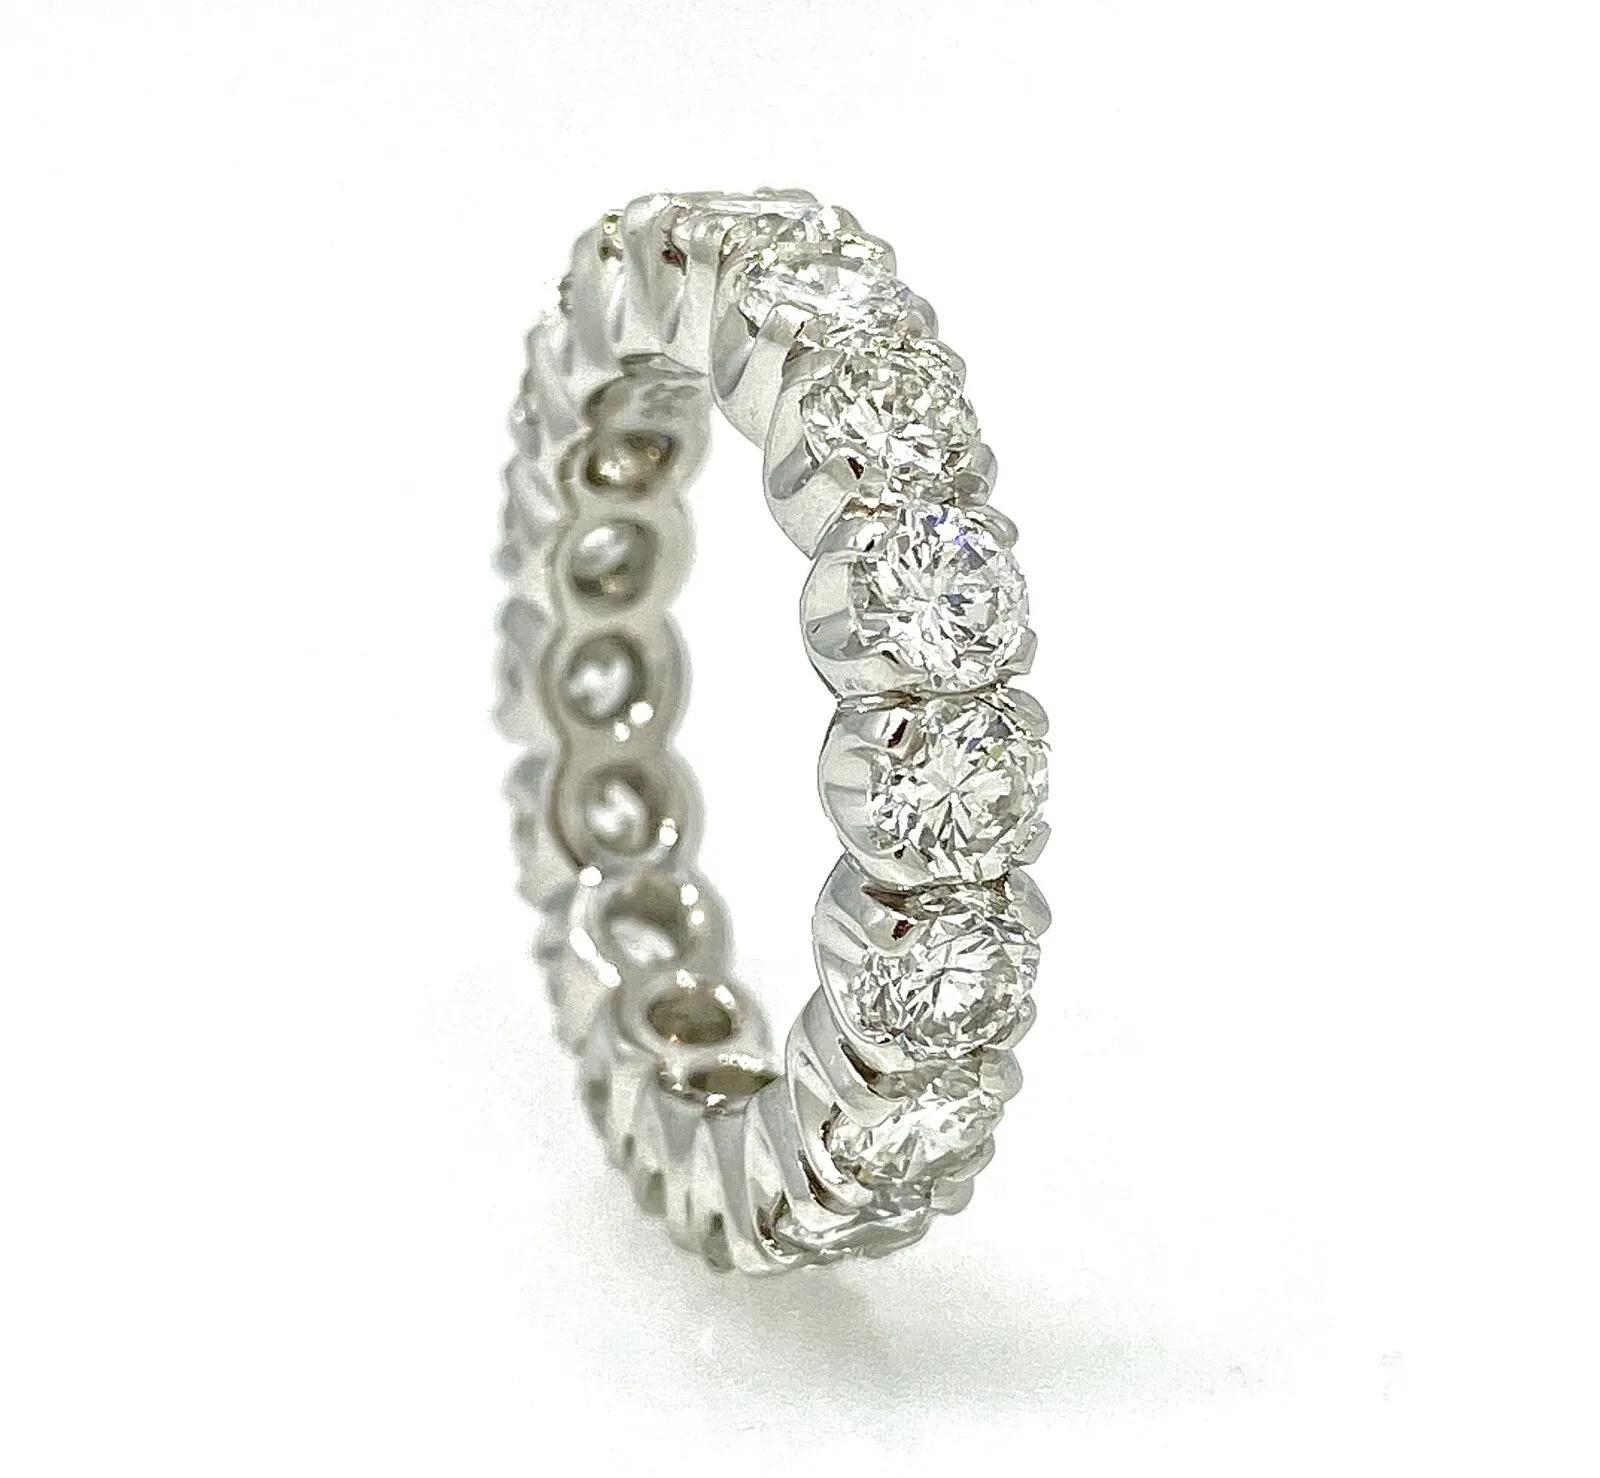 Women's Round Diamond Eternity Band Ring 3.86 carat total in Platinum 4 mm Size 5.25